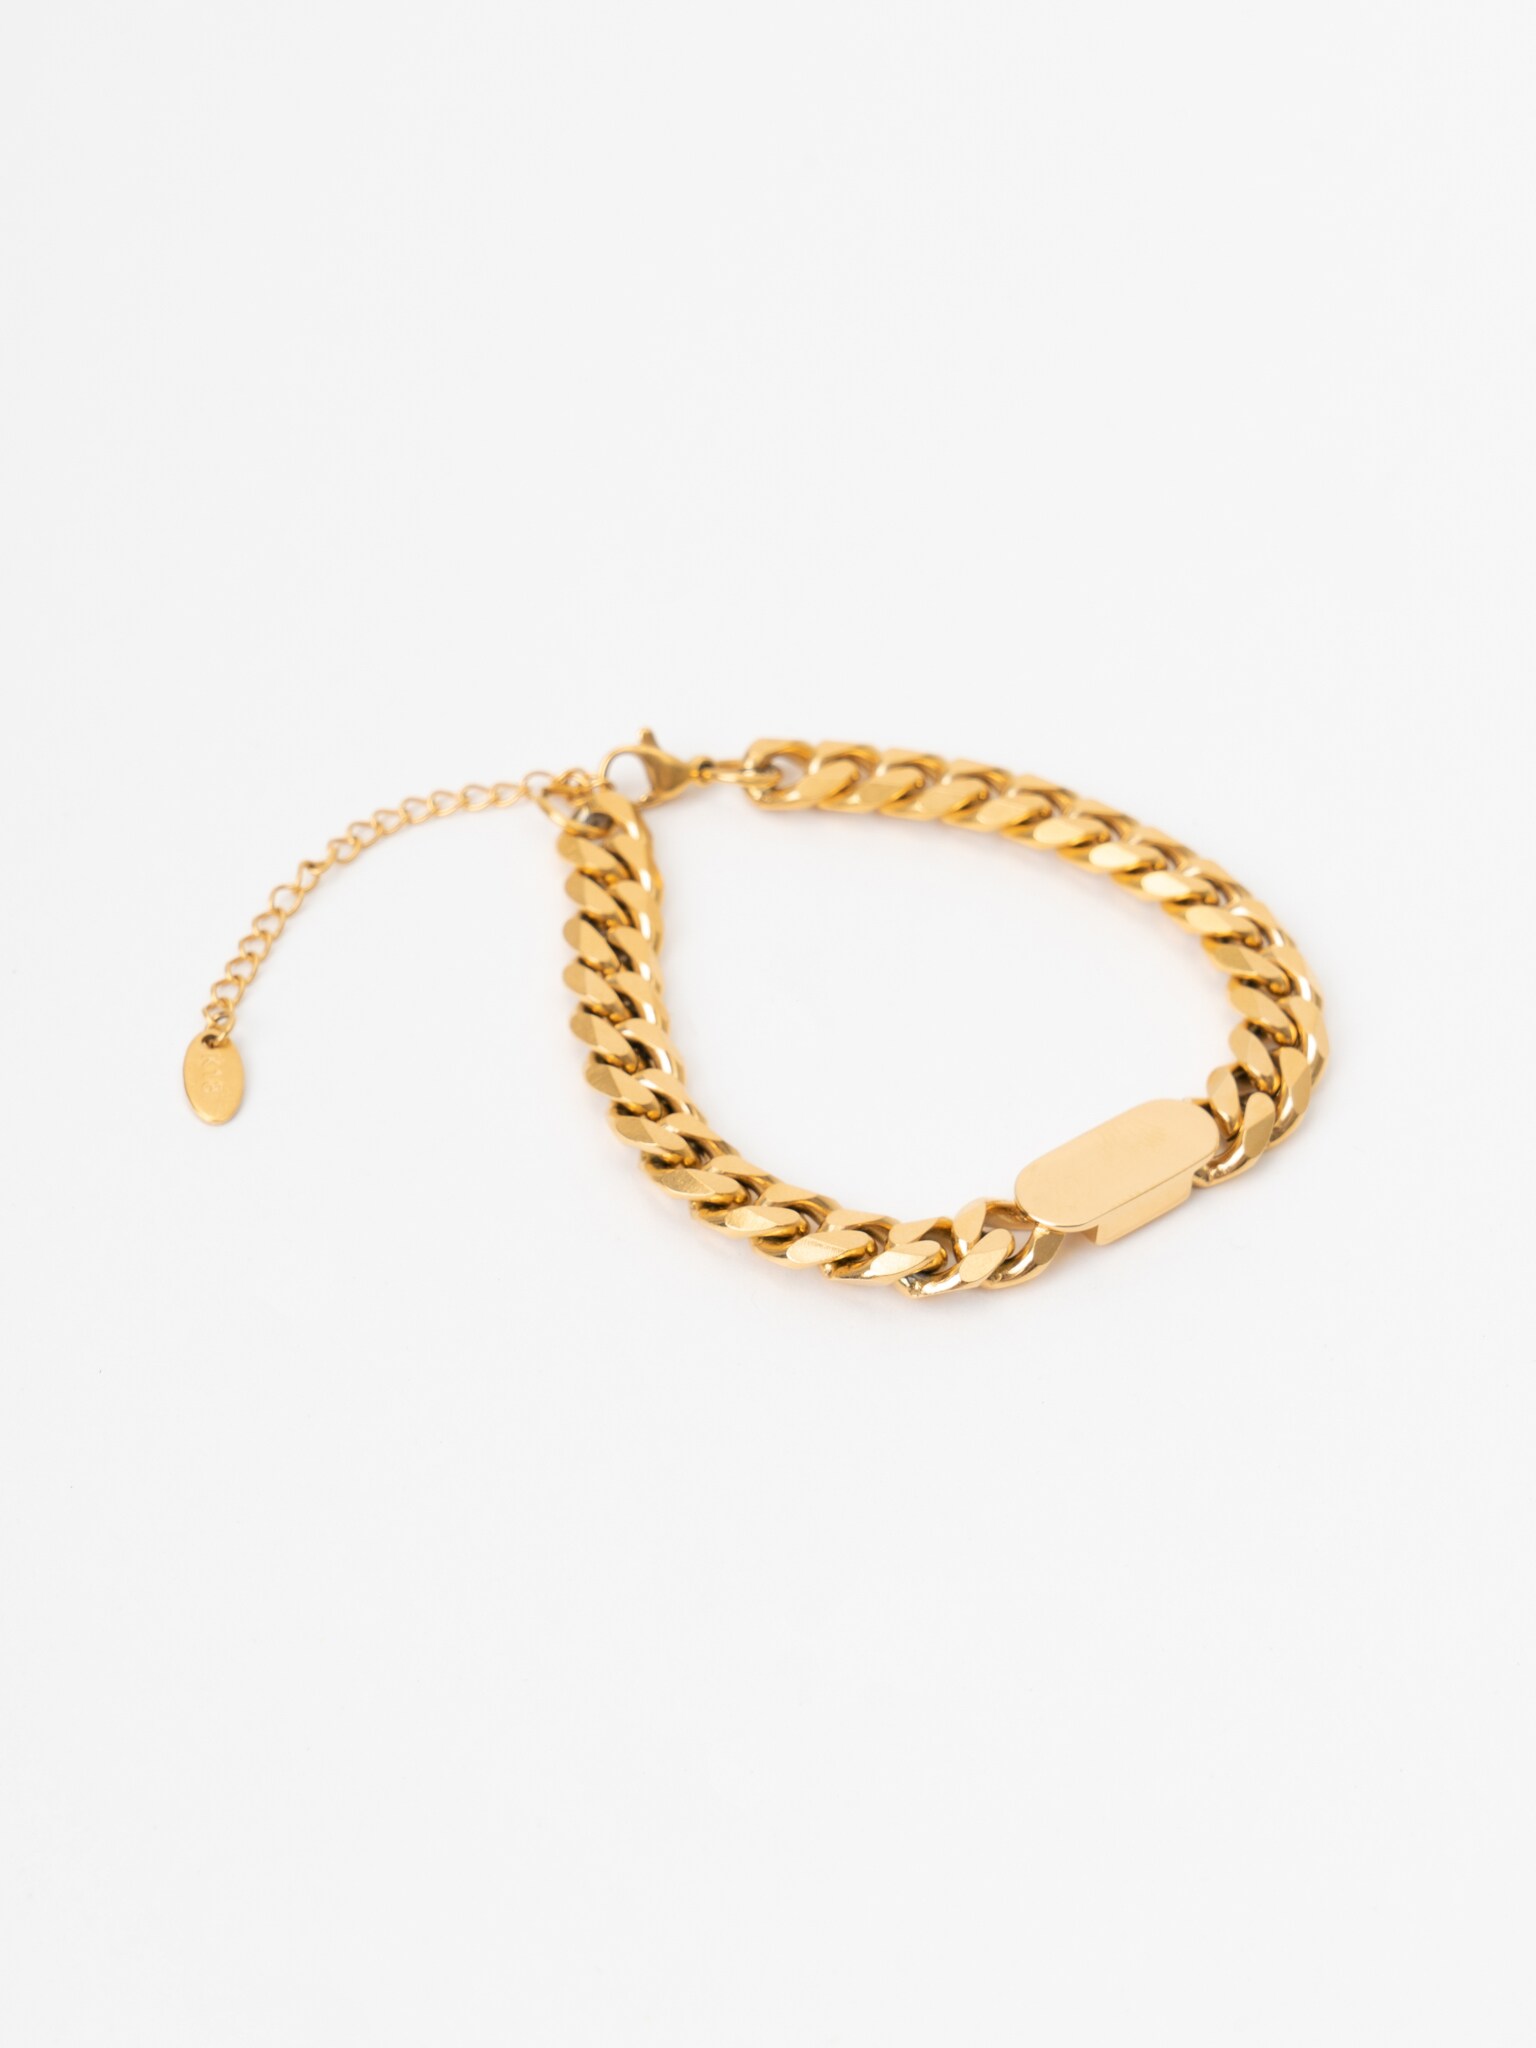 Buy Gold Plated Carved Bracelet by Nayaab by Aleezeh Online at Aza Fashions.  | Aza fashion, Carving, Fashion